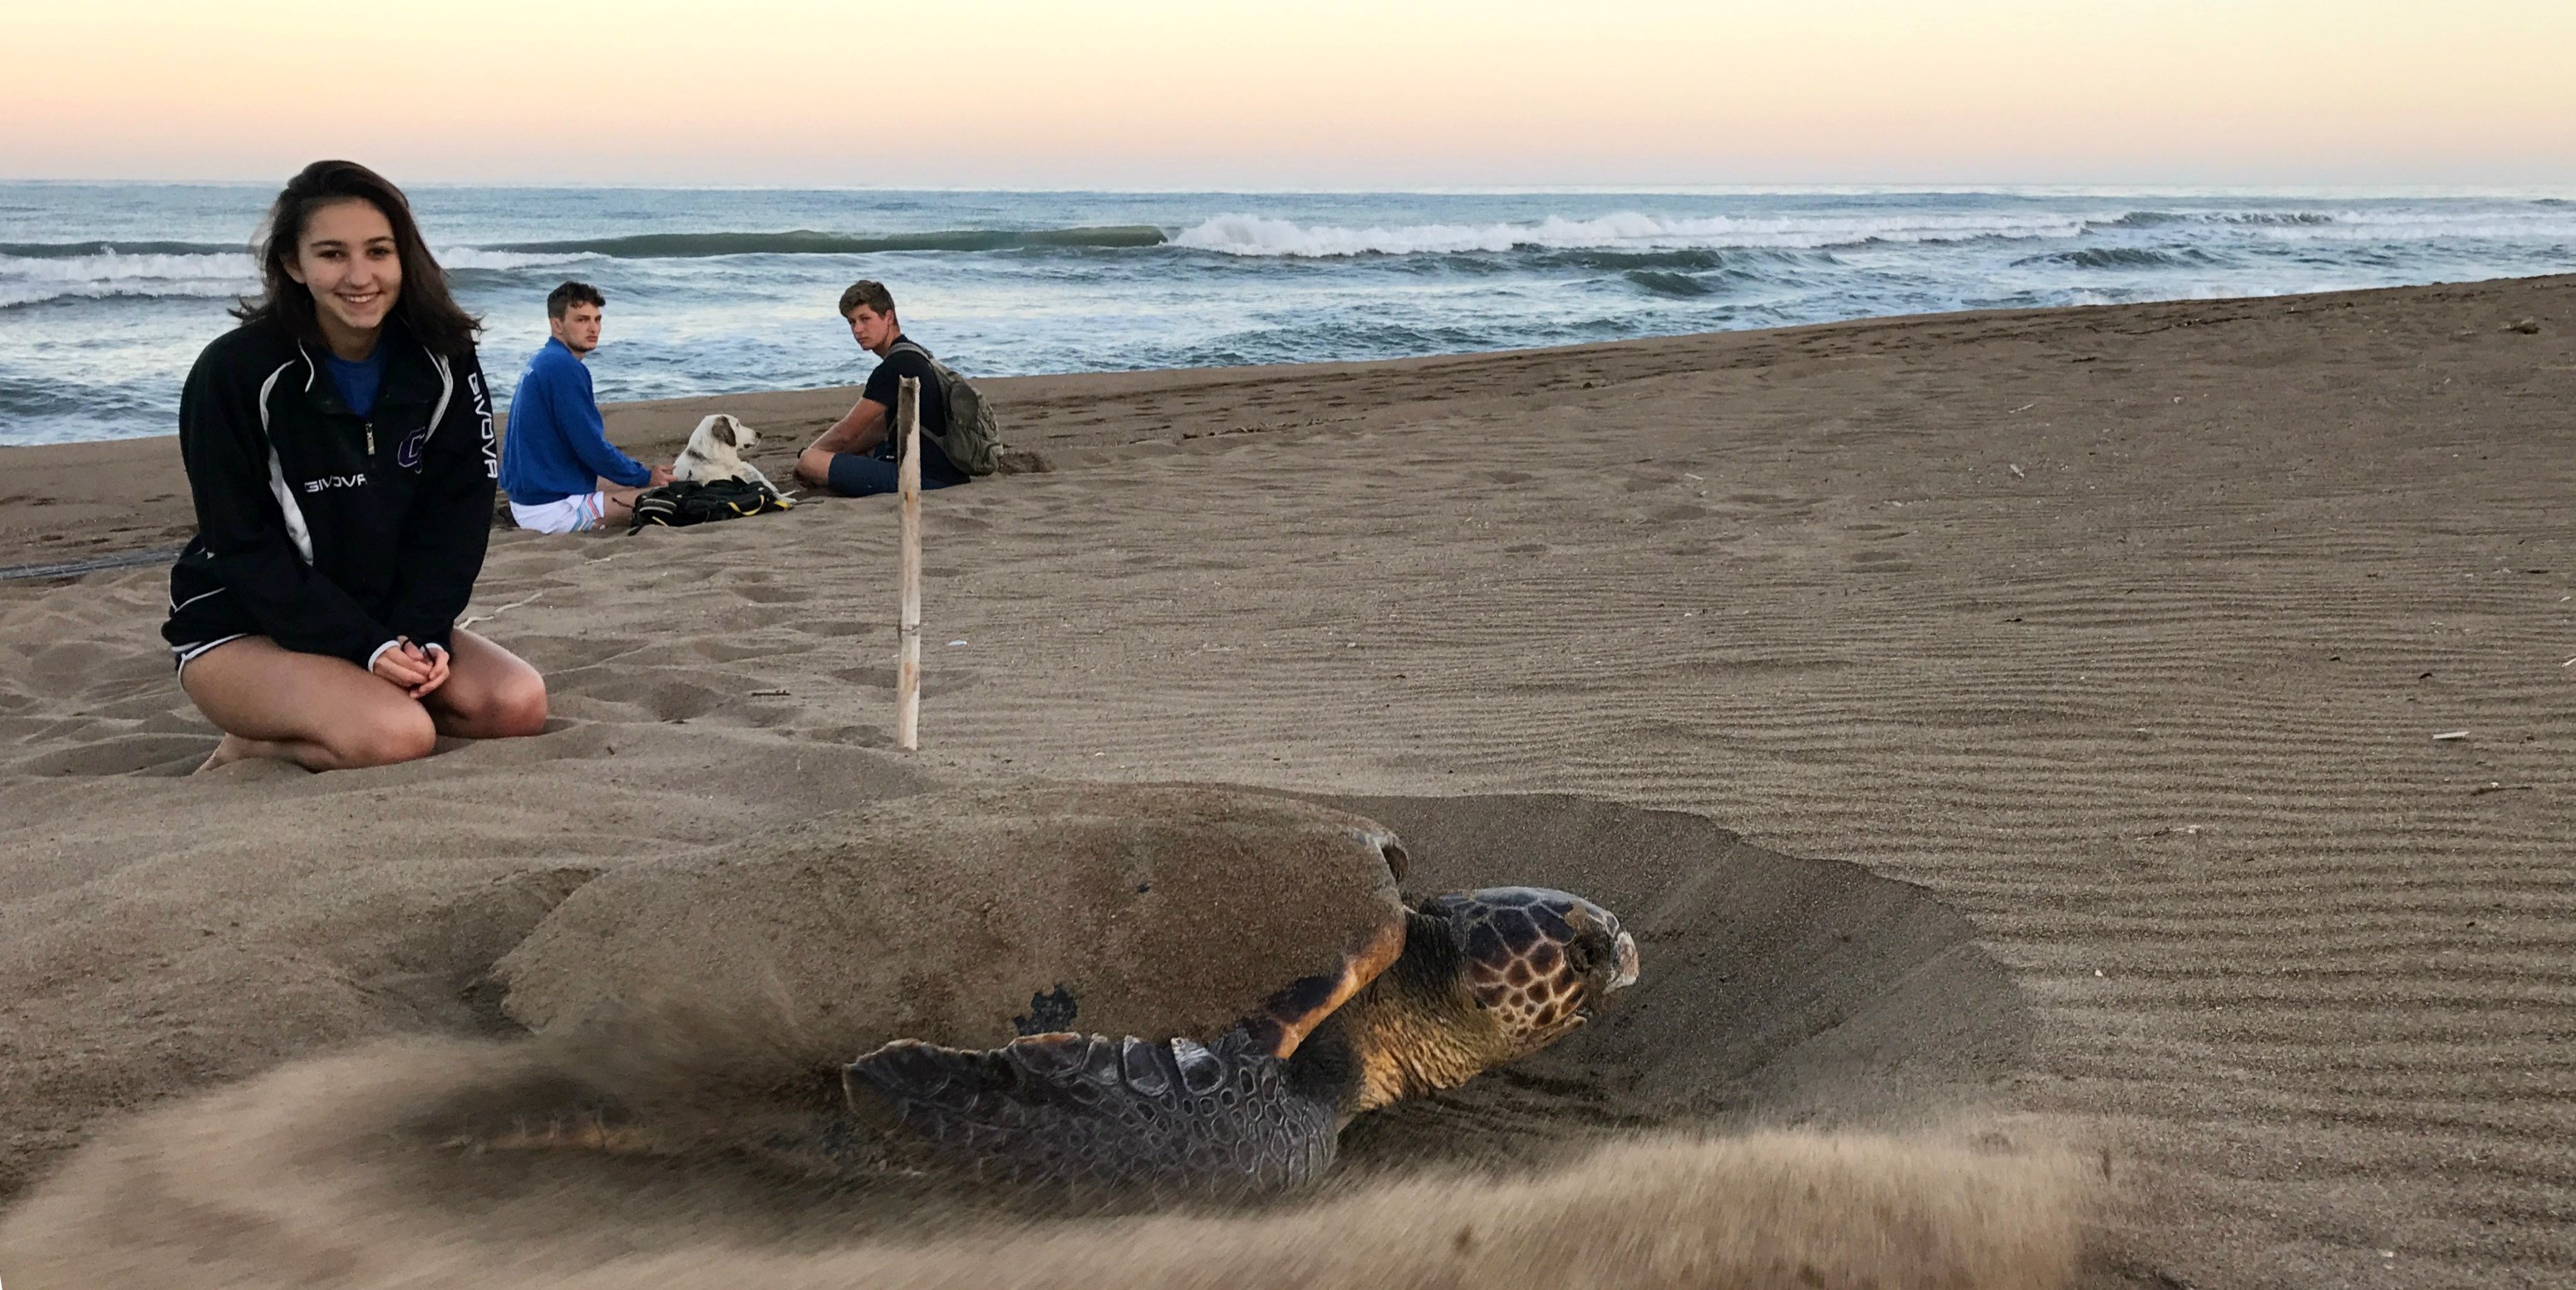 A participant takes part in one of GVI's gap year opportunities, by helping to monitor the nesting activity of endangered loggerhead turtles in Greece.